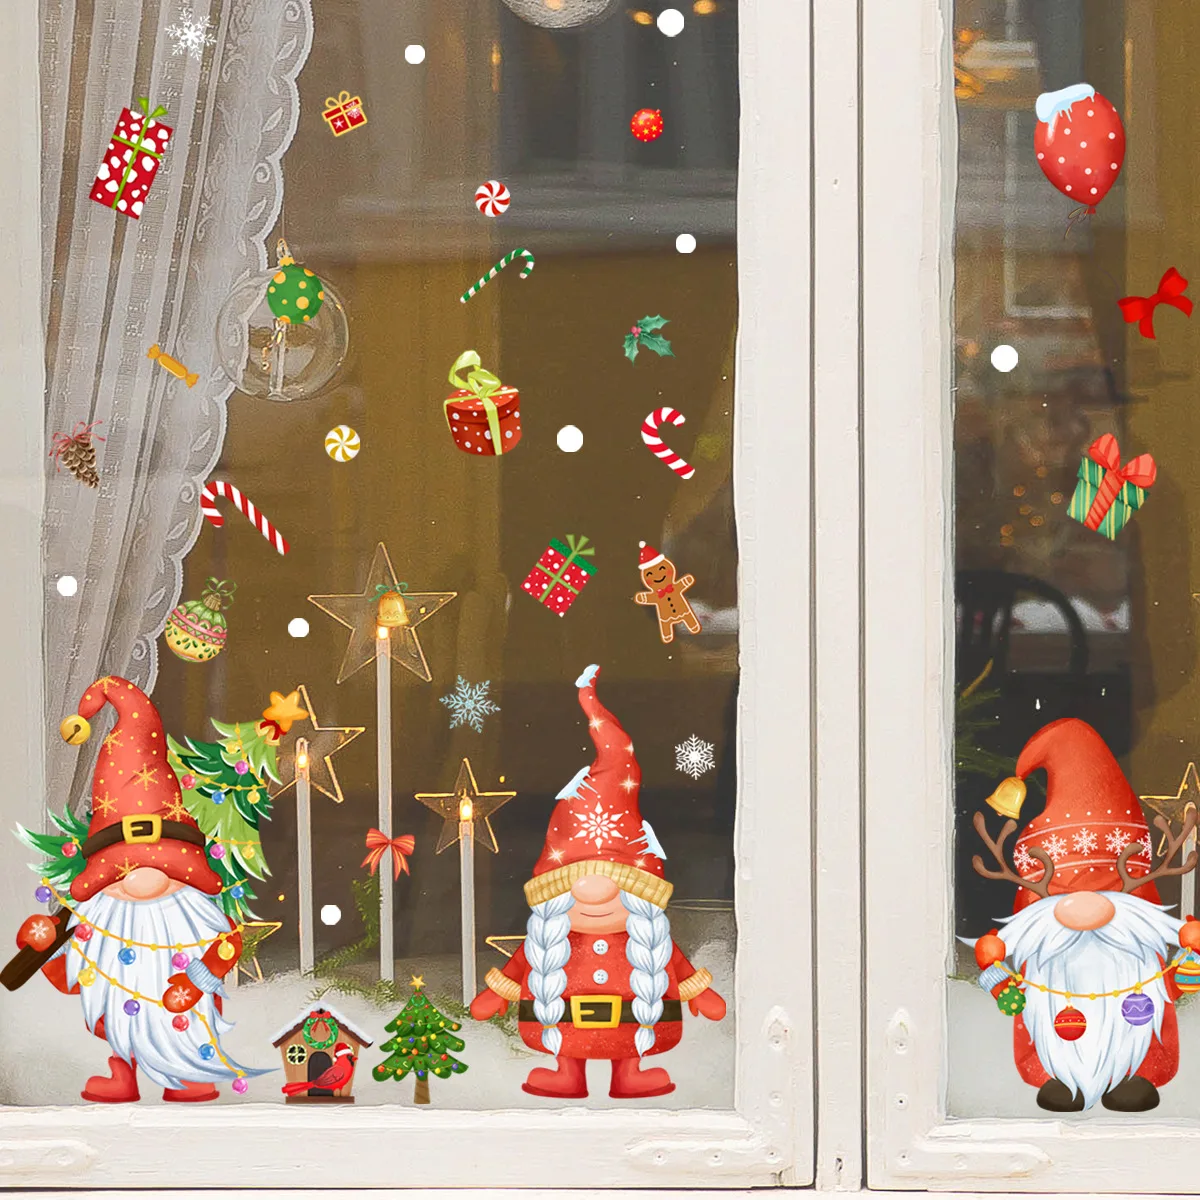 3pcs Cartoon Santa Christmas Static Stickers Wall Stickers Double-sided Visual Glass Window Wall Stickers Wallpapers Dj4035 magnetic window cleaner double sided glass cleaner outside window cleaner magnetic window cleaner with1 5m rope for window